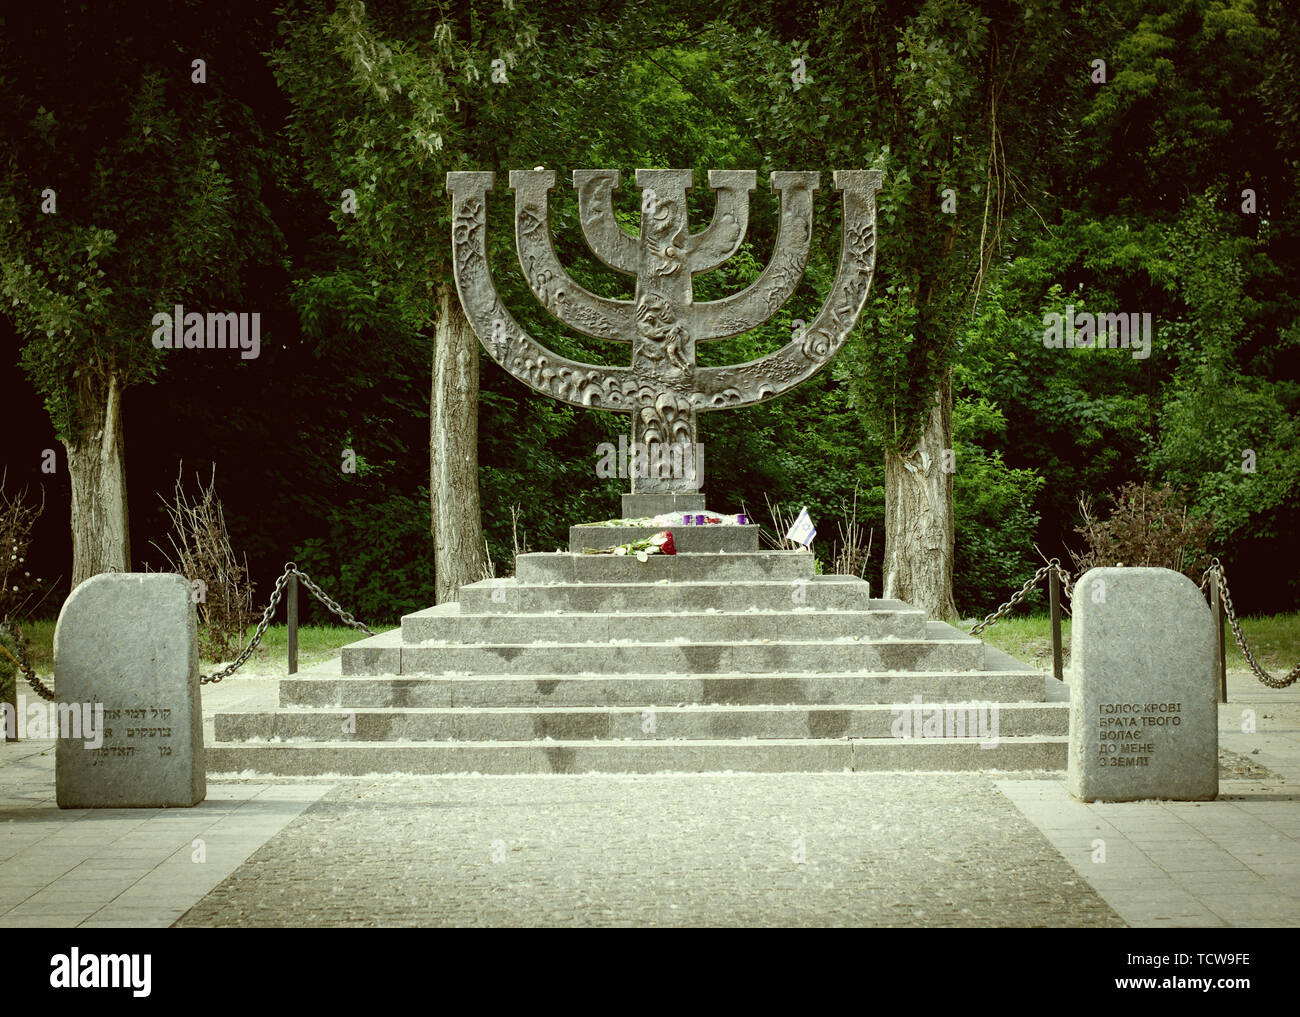 Kiev Ukraine - May 25, 2019. Menorahs Monument at Babi Yar memorial complex, place of massacres carried out by German forces during World War II. Stock Photo